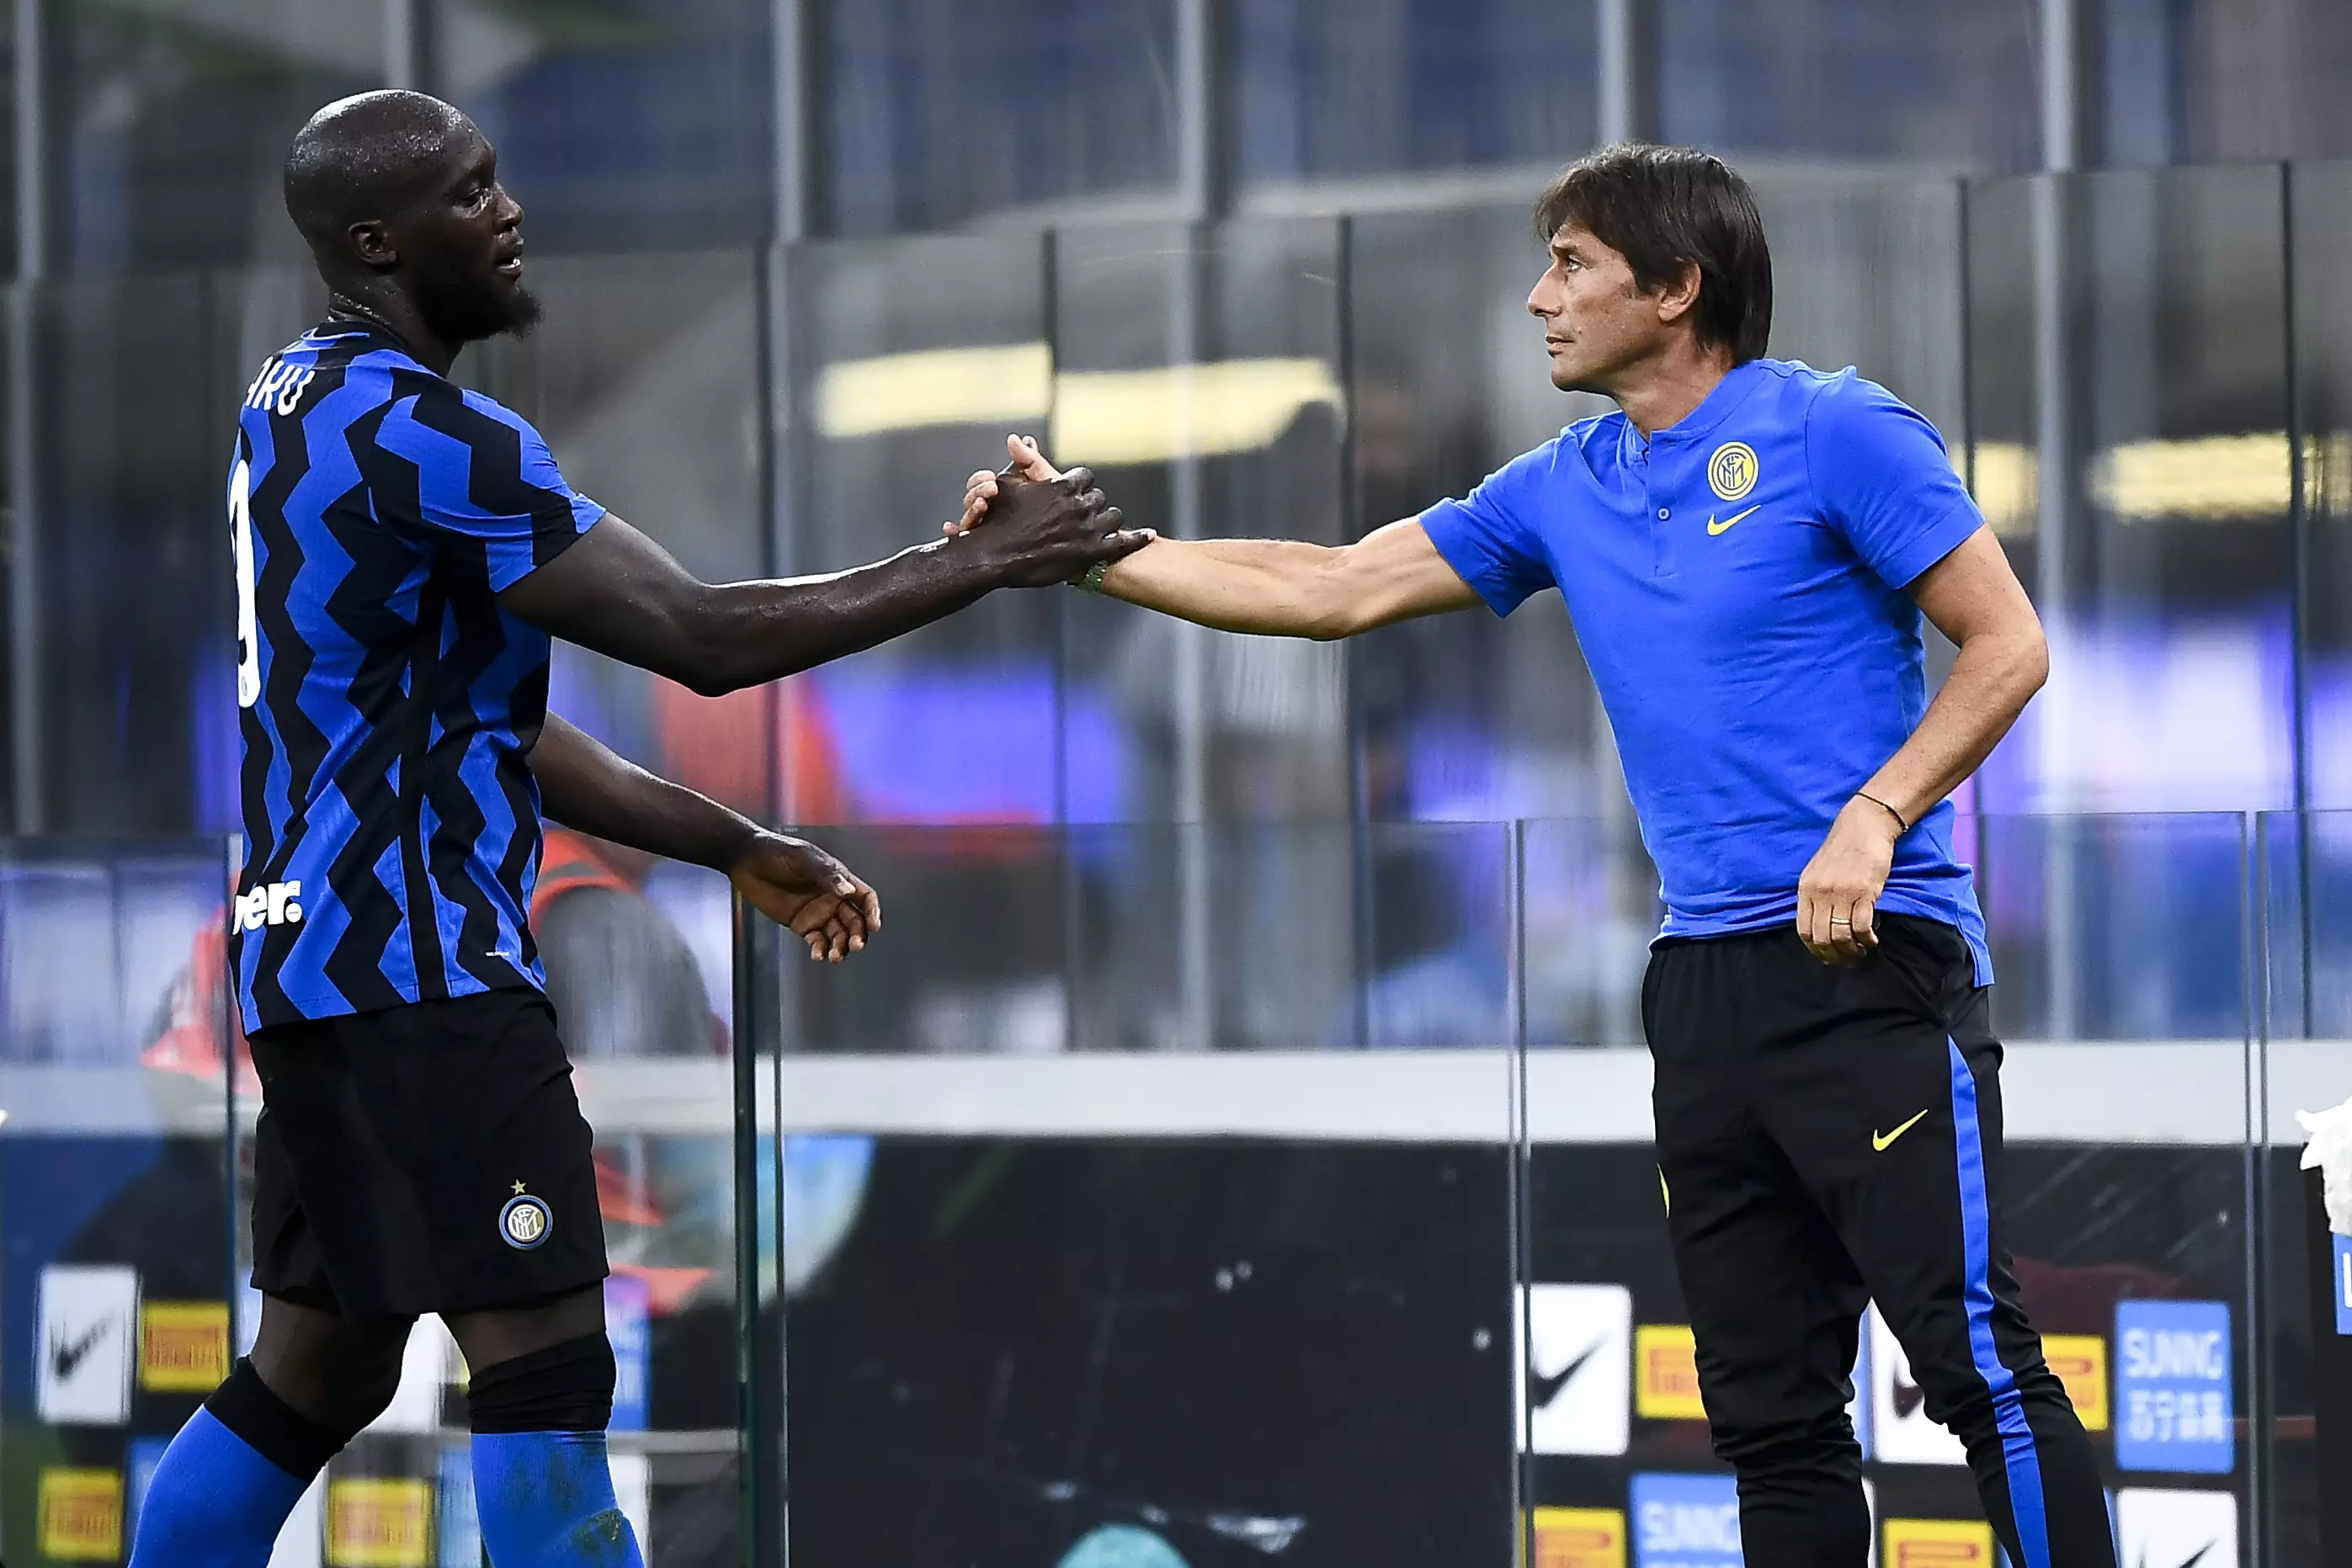 Conte and Lukaku now work together with Inter. Image: PA Images